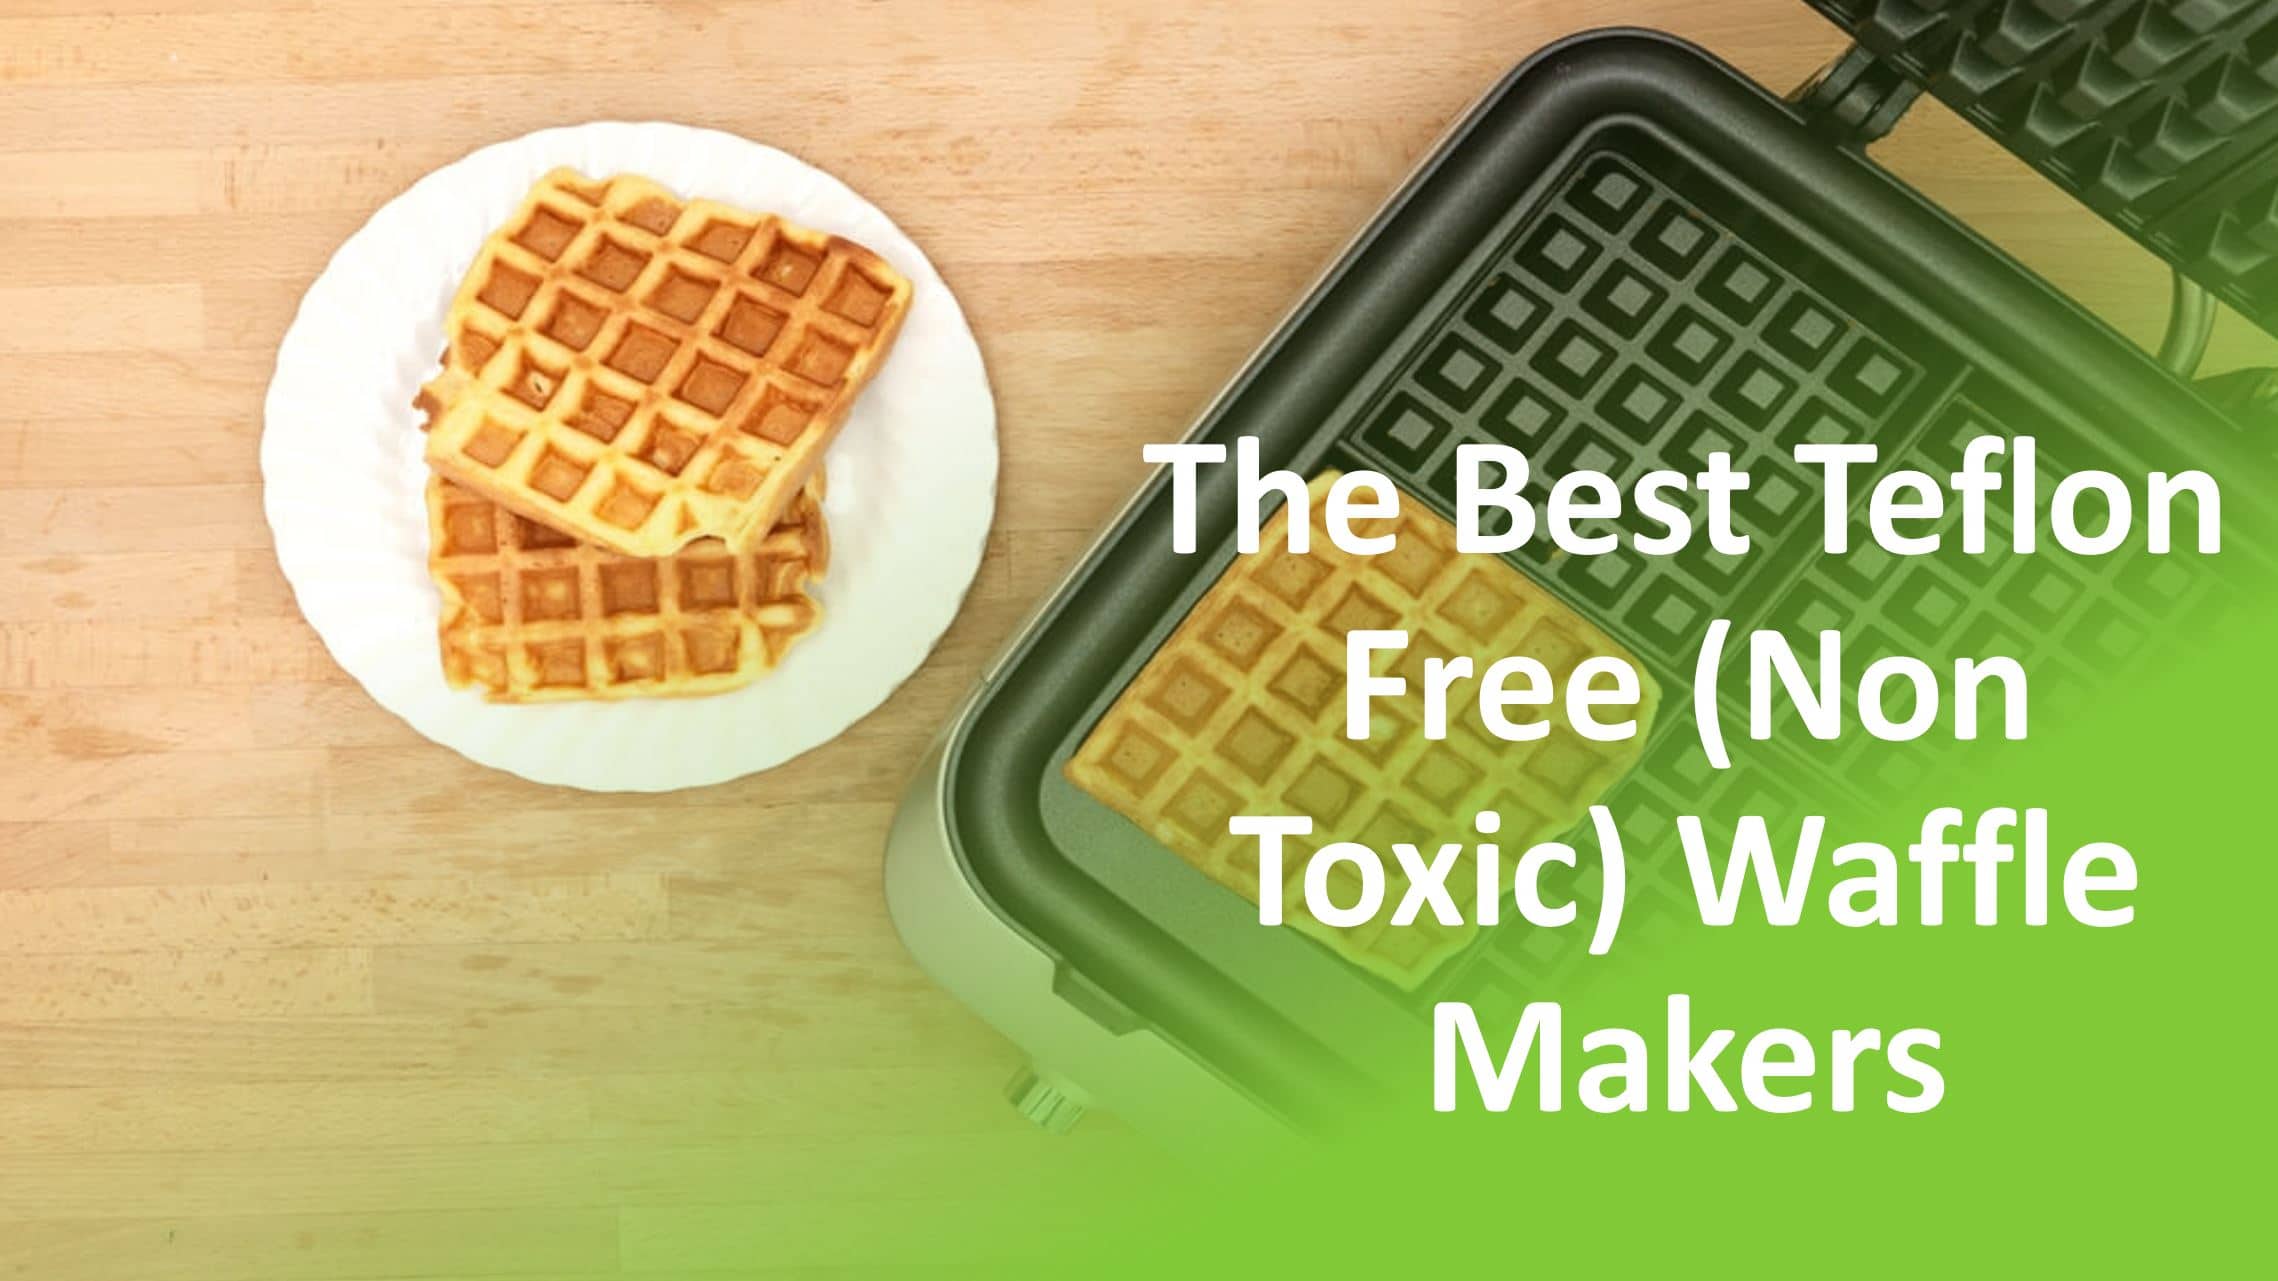 https://www.foodchamps.org/wp-content/uploads/2020/10/the-best-teflon-free-non-toxic-waffle-makers.jpg